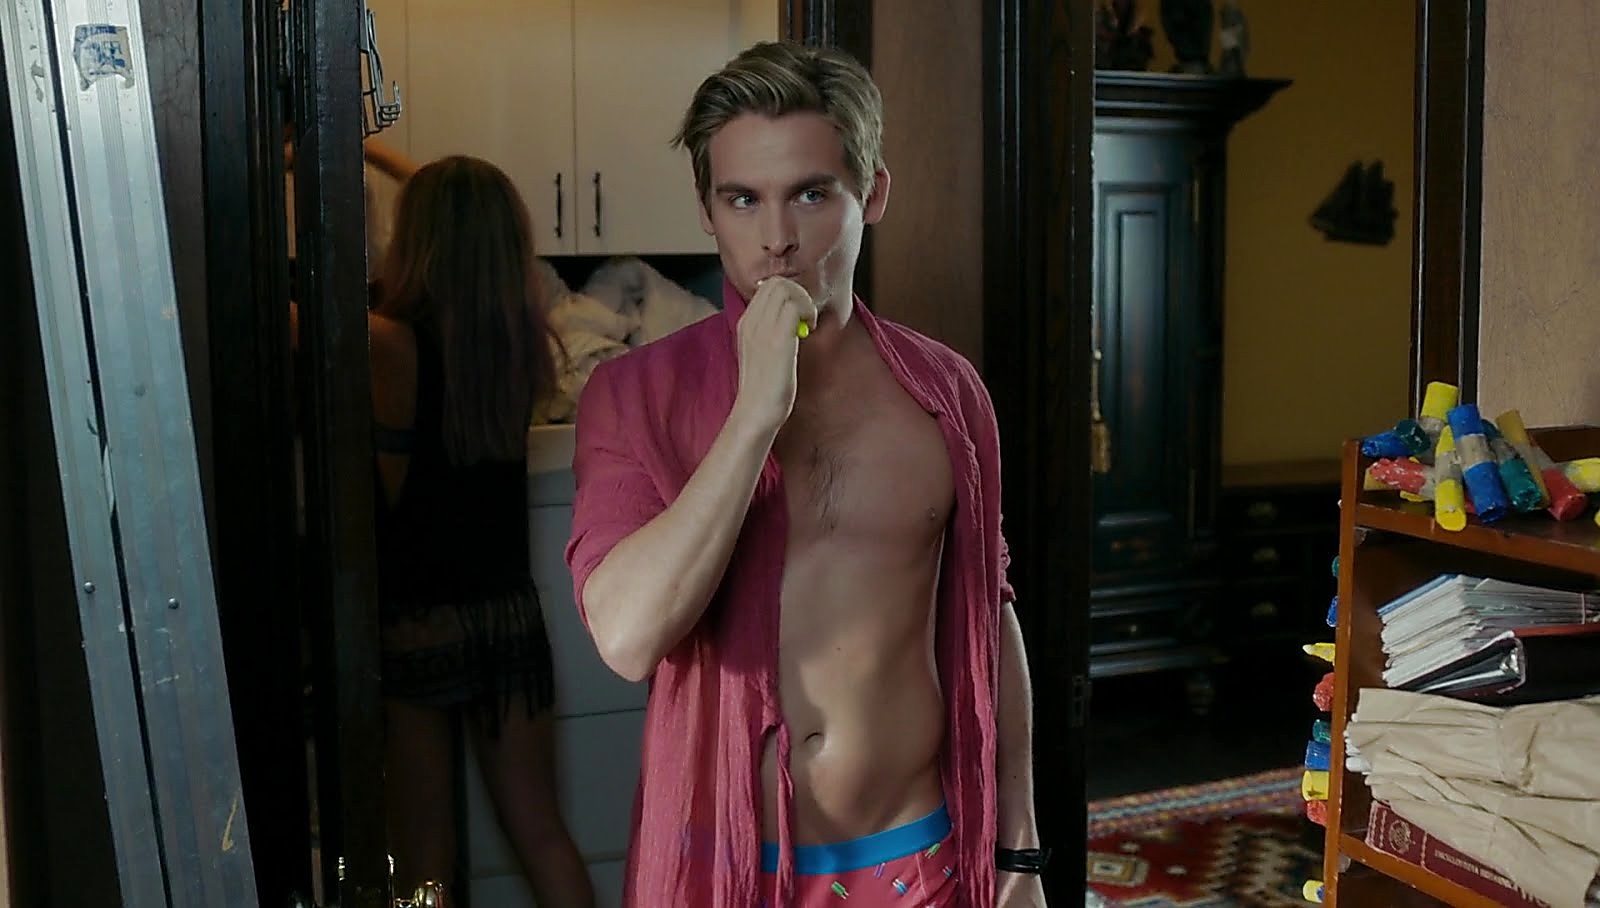 Kevin Zegers sexy shirtless scene May 15, 2018, 9am